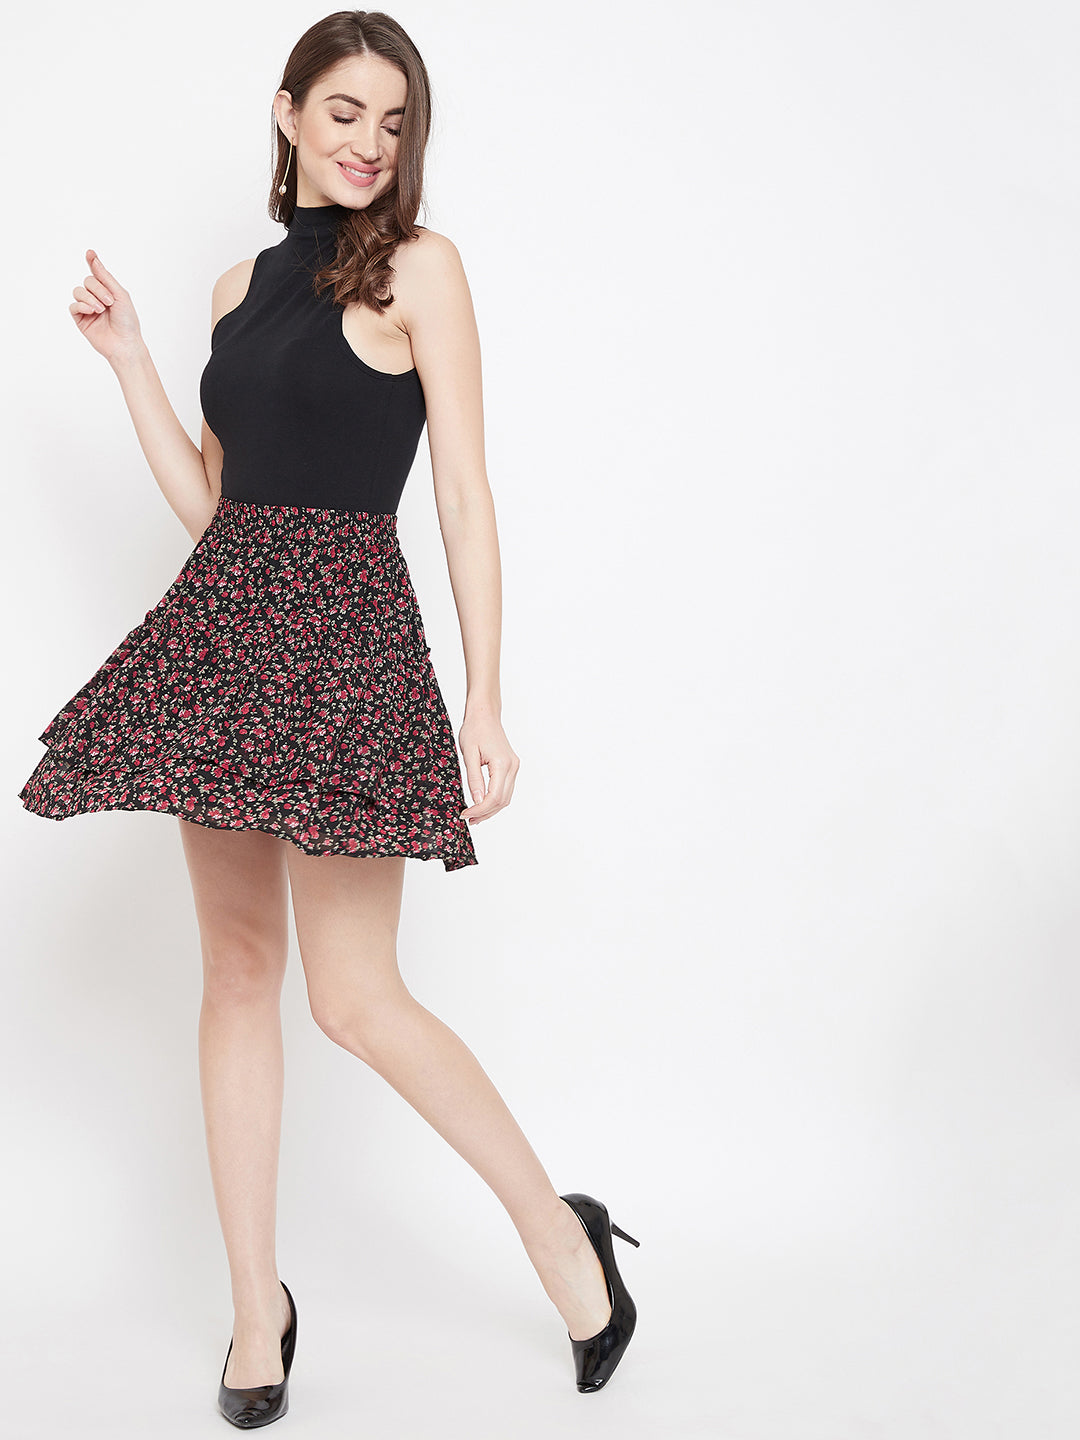 How to Style Skirts: Four Tips to Make it Really Easy